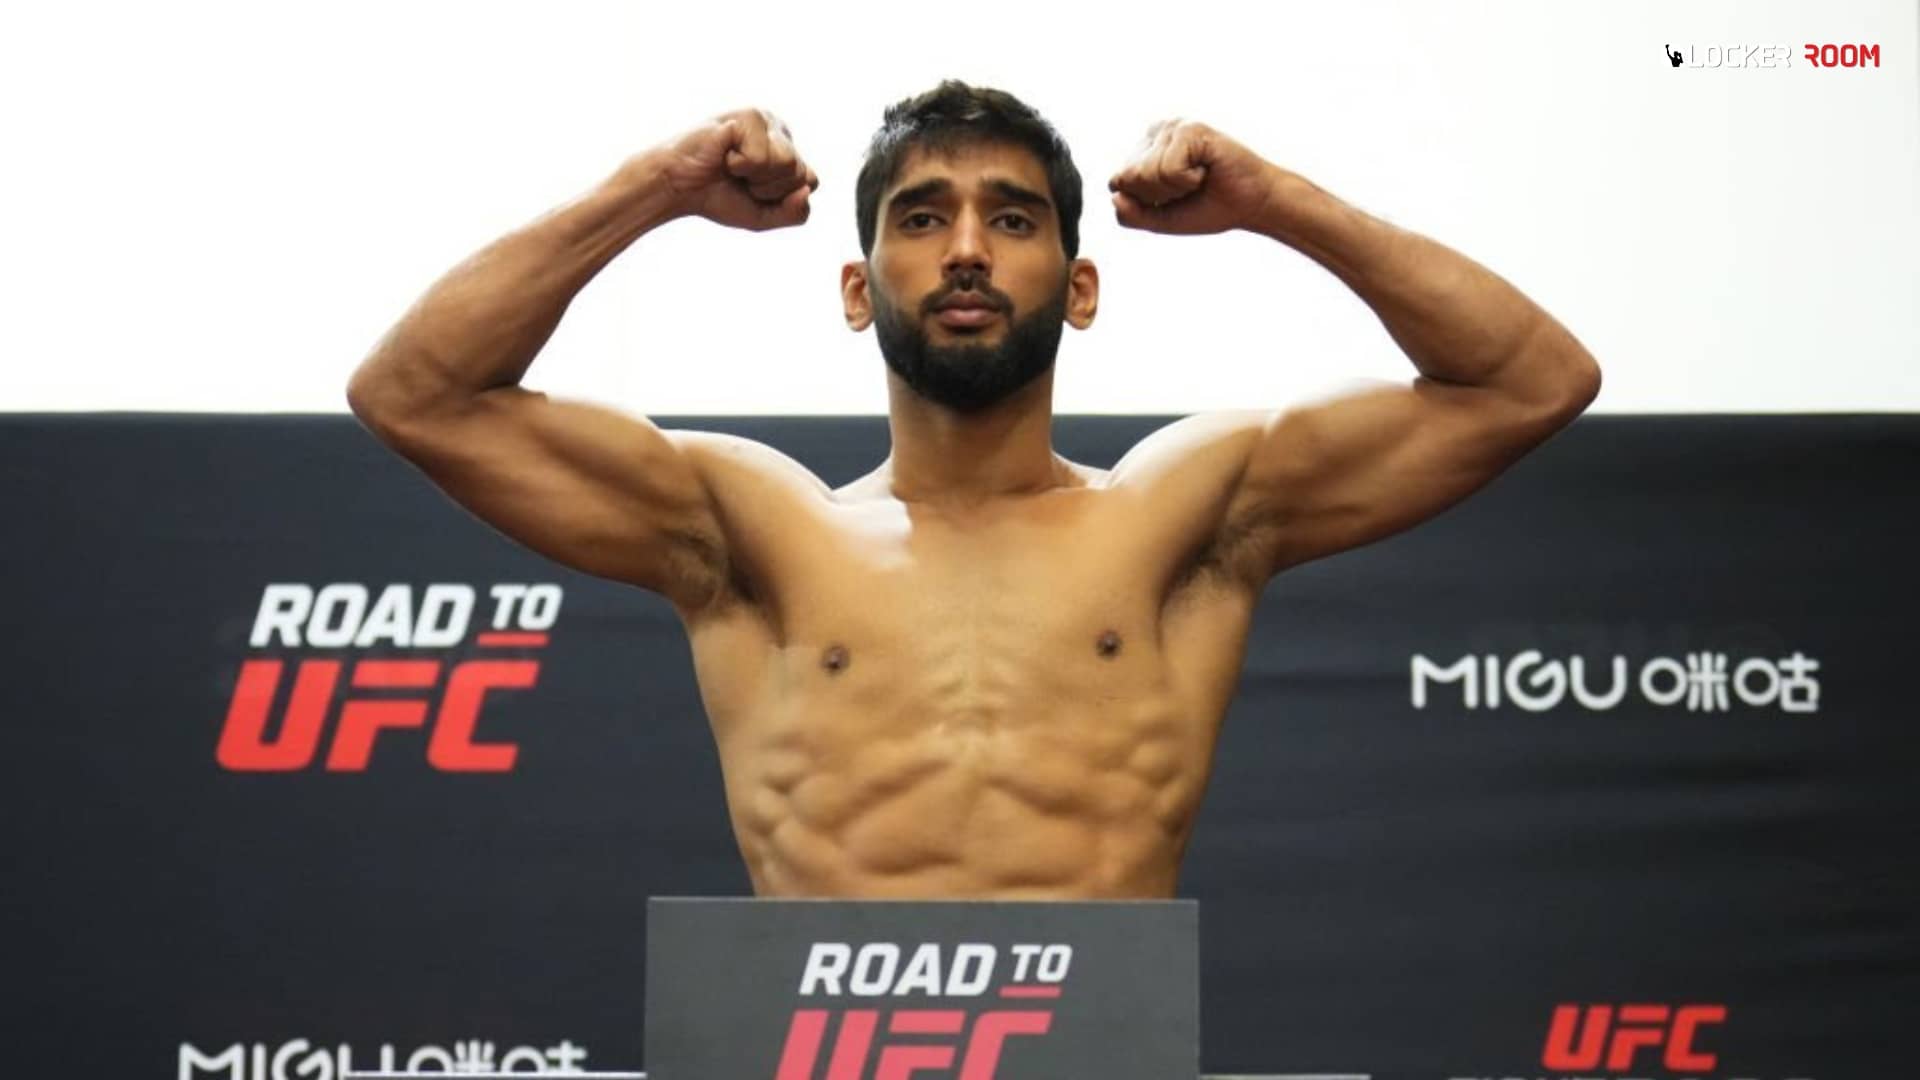 Anshul Jubli joins Conor McGregor's management company: Paradigm Sports ropes in Indian UFC fighter